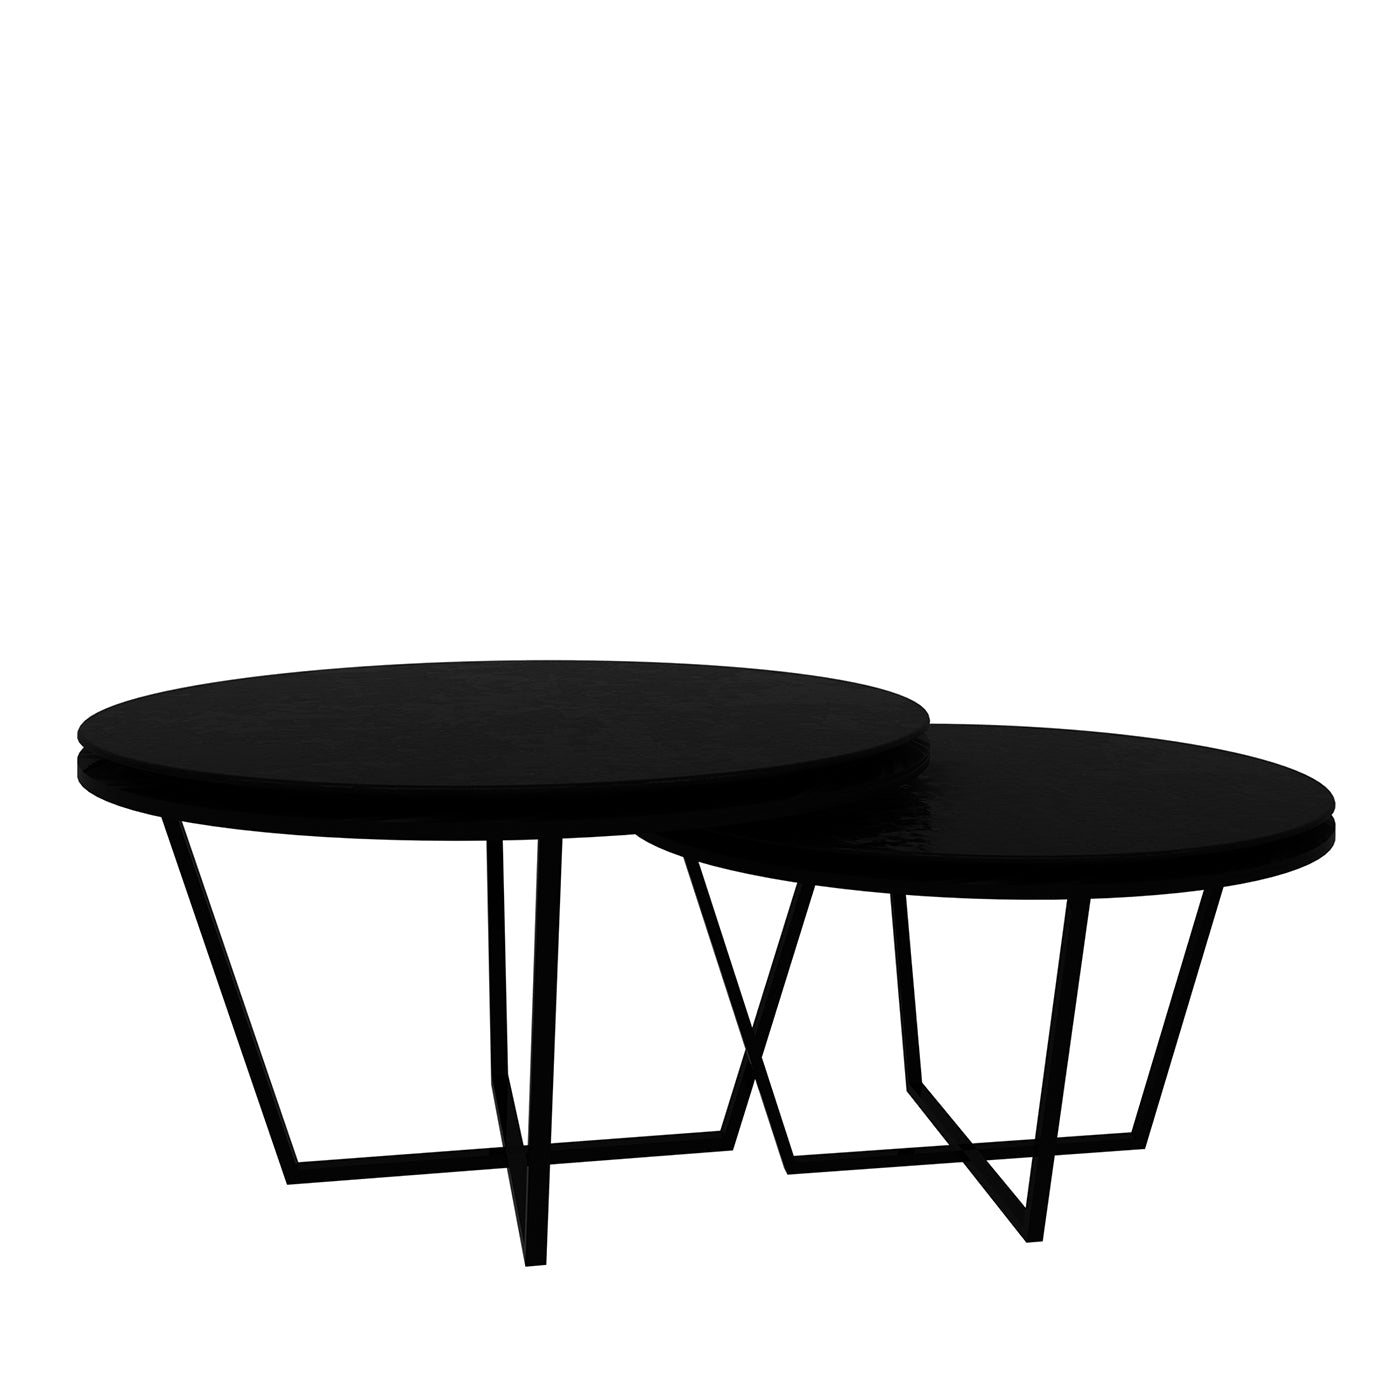 Set of 2 Different-Height Round Black Coffee Tables - Main view